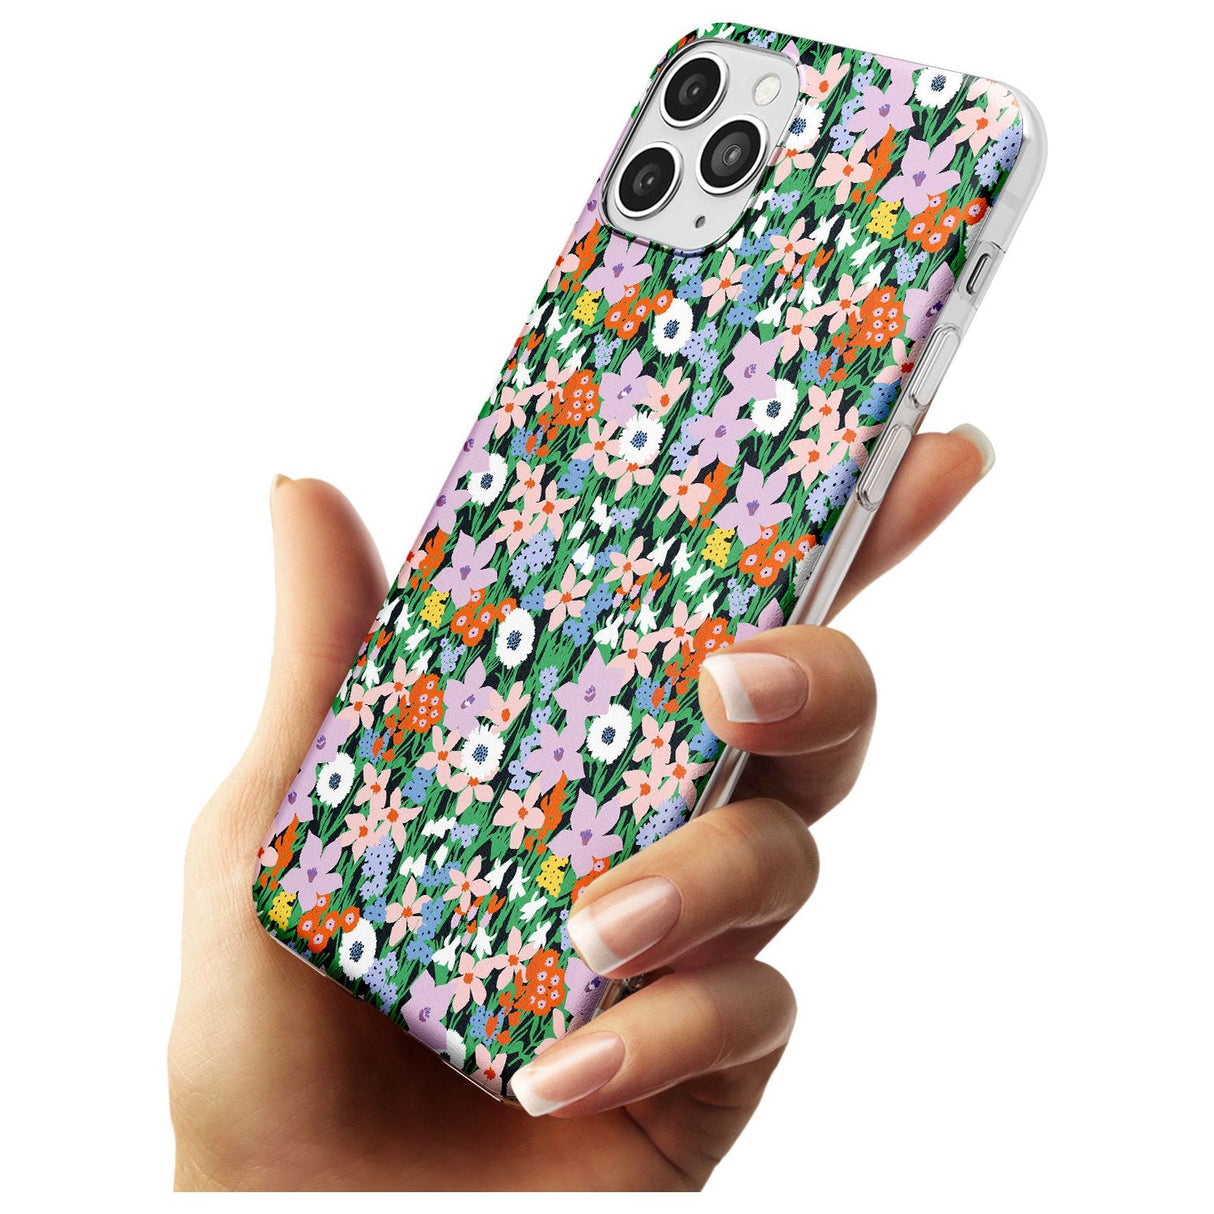 Jazzy Floral Mix: Solid Black Impact Phone Case for iPhone 11 Pro Max